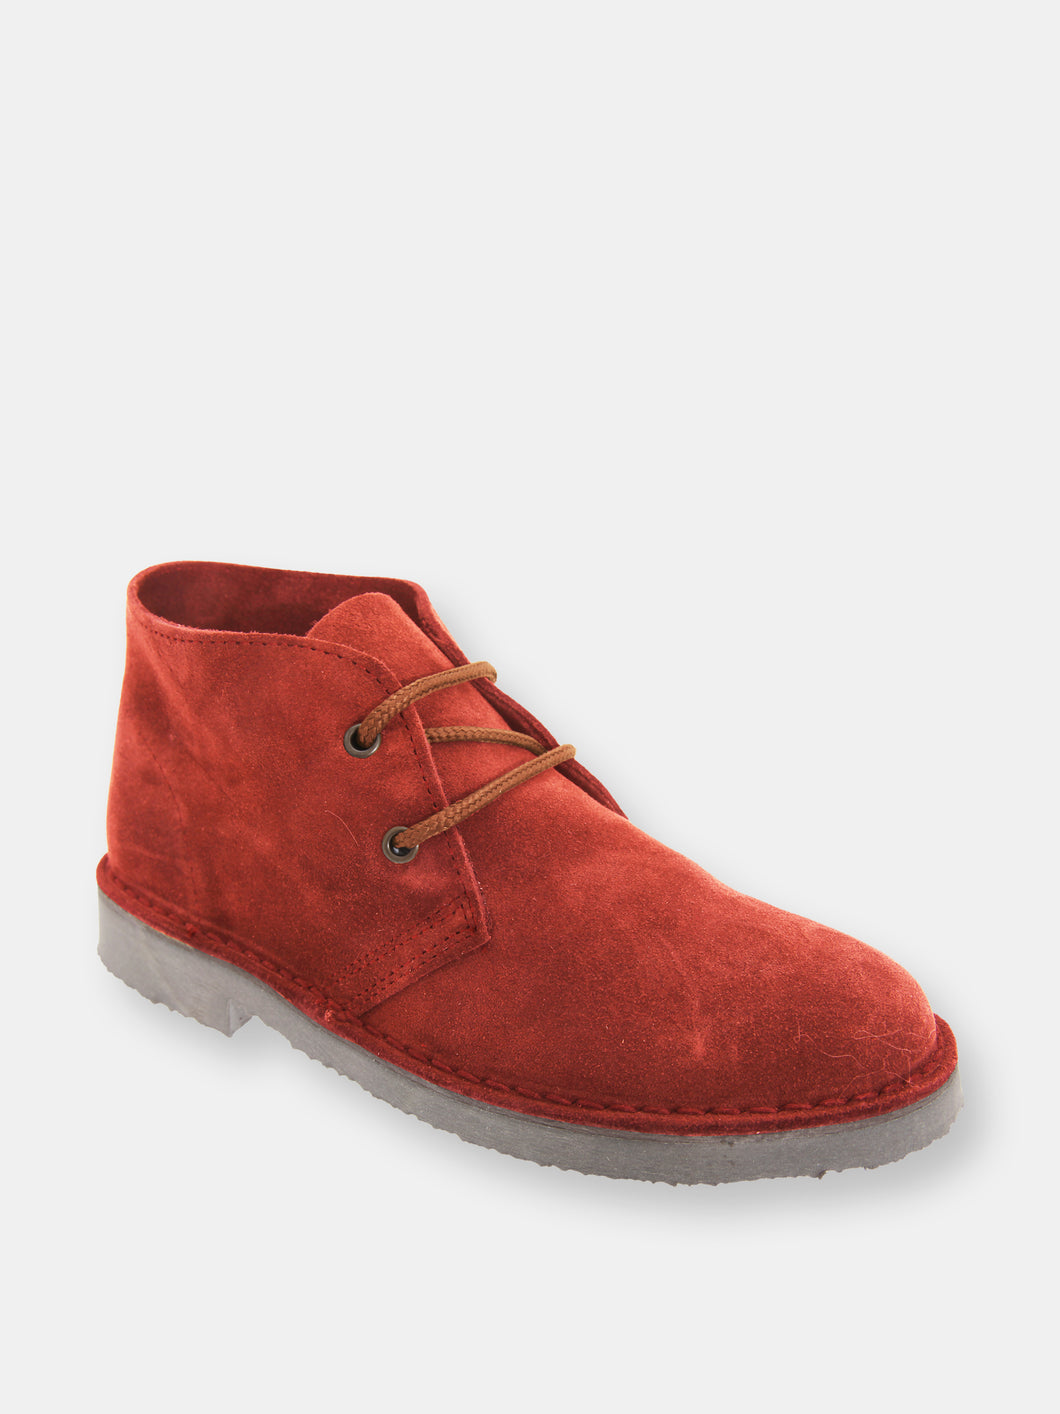 Adults Unisex Real Suede Unlined Desert Boots (Red)